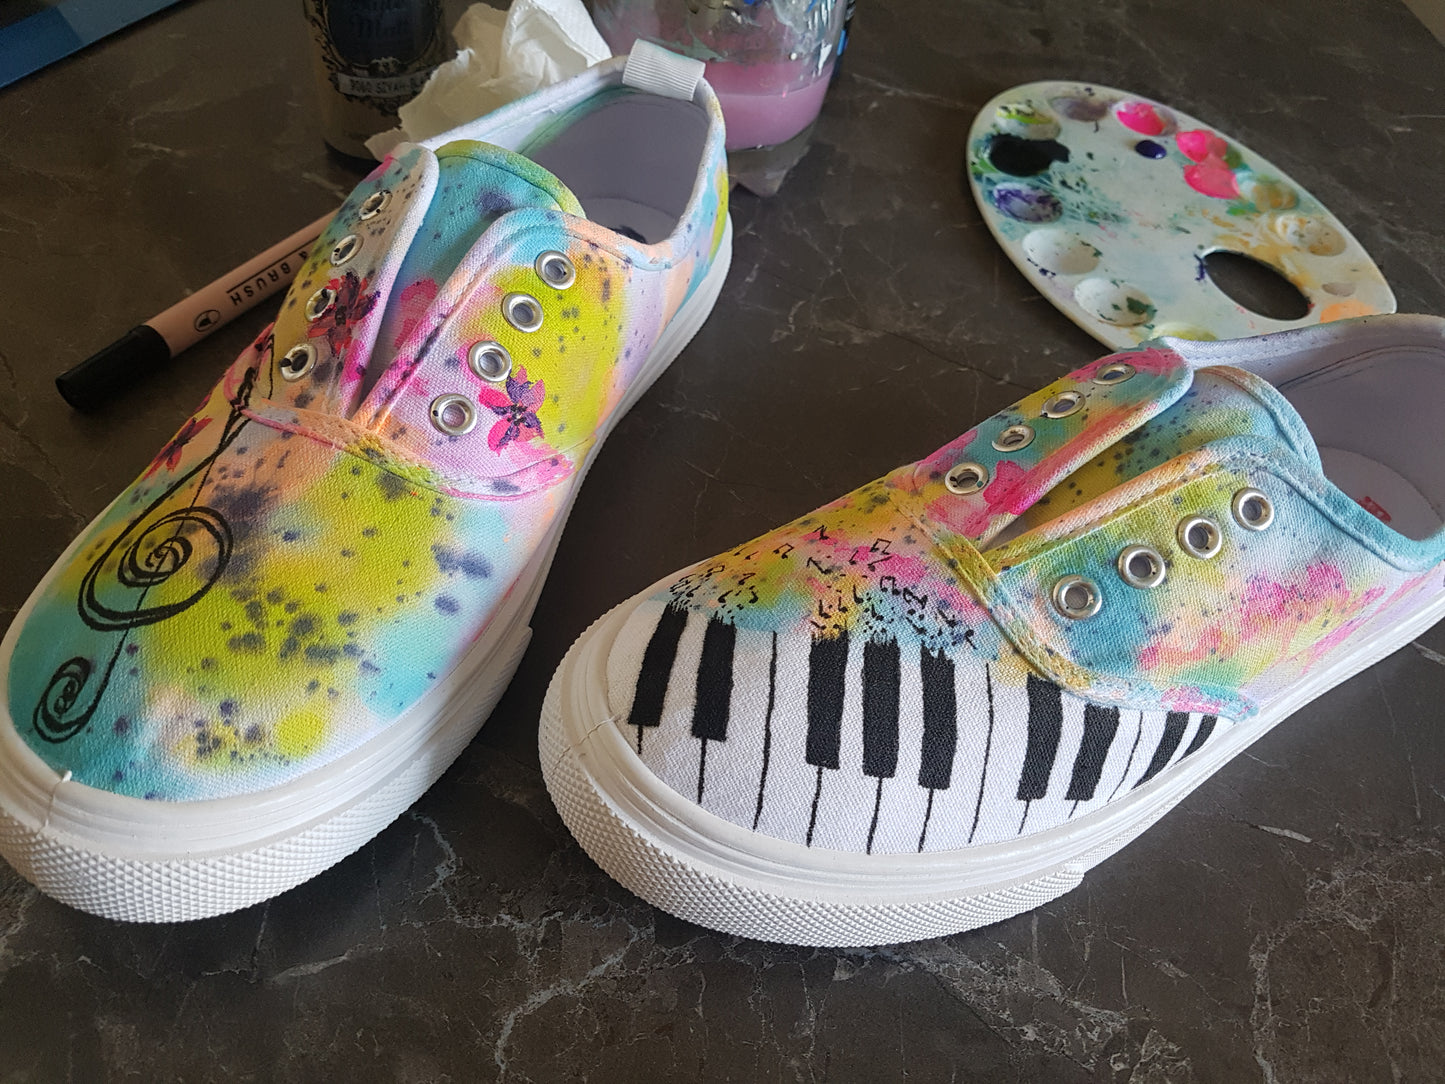 Music on my shoes